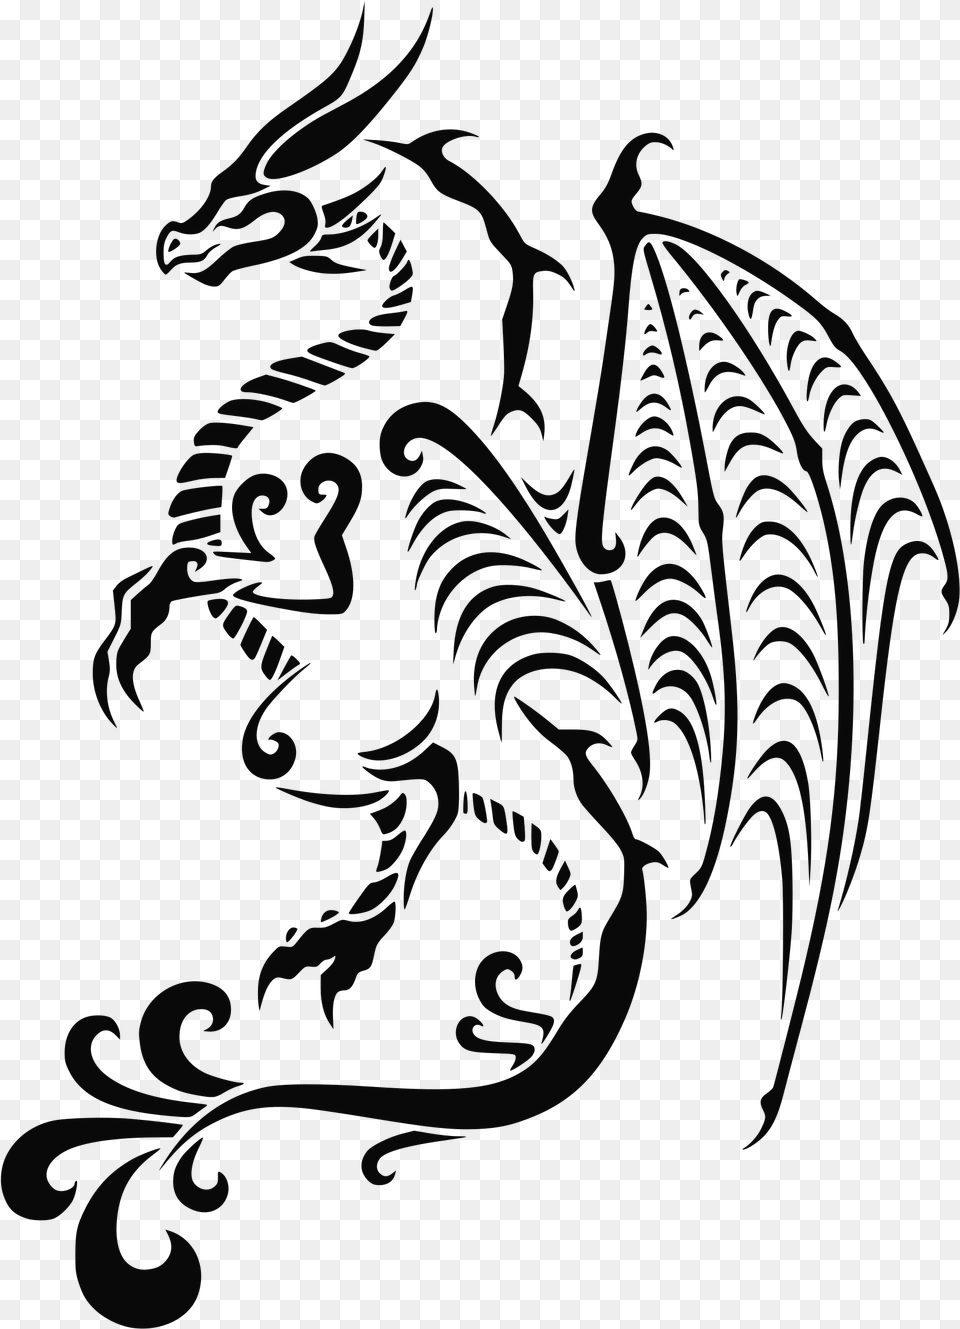 This Icons Design Of Dragon Tattoo Png